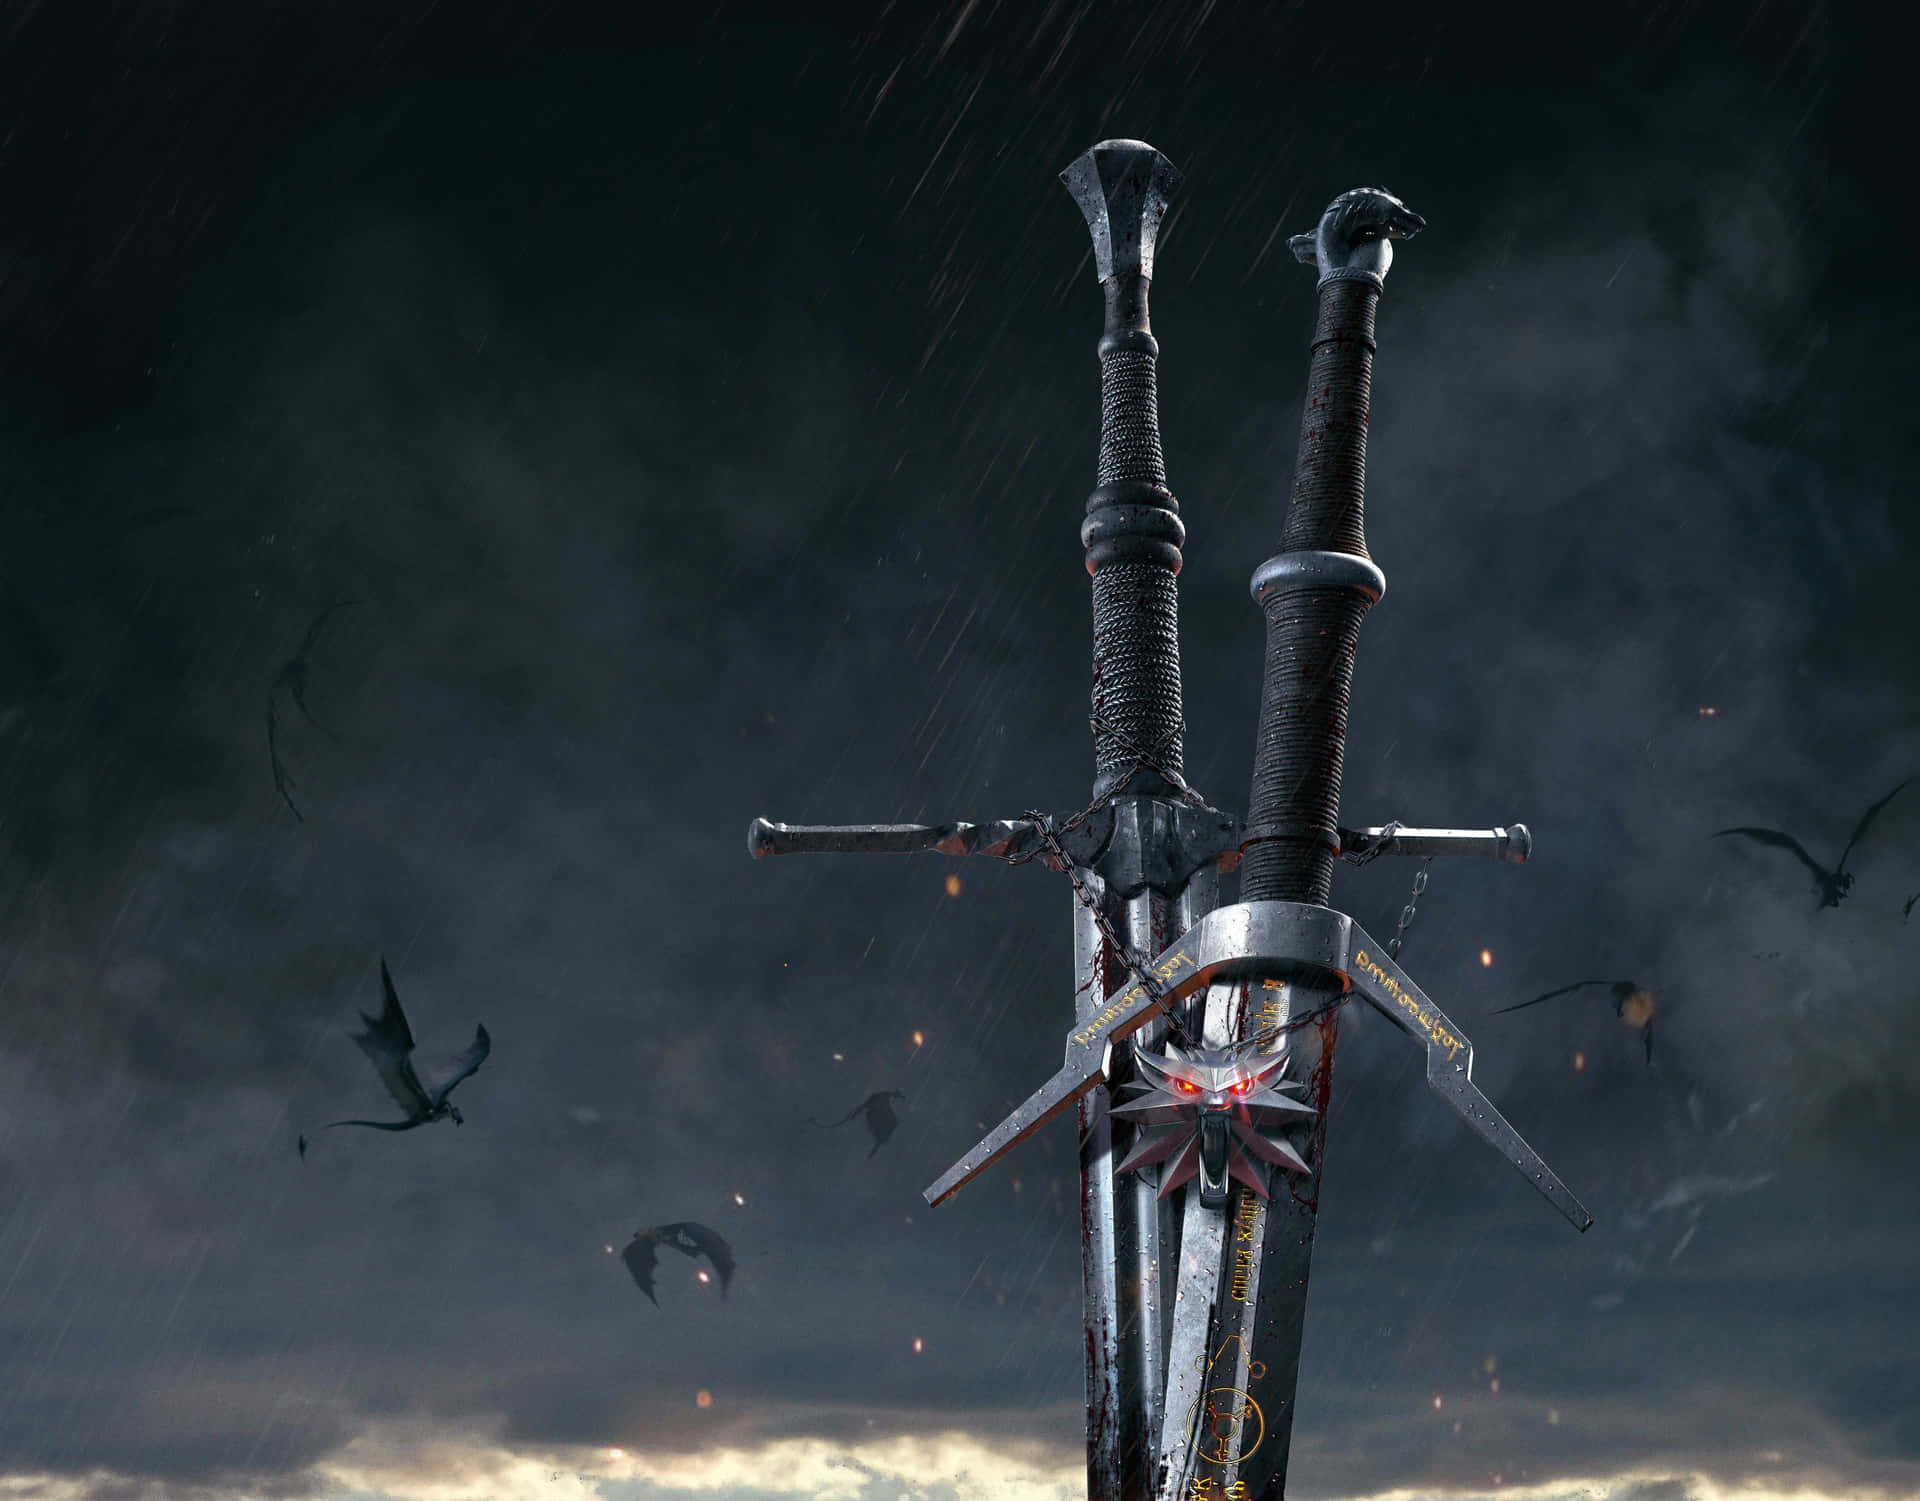 Caption: The Legendary Witcher's Sword, A Symbol Of Honor And Resilience Wallpaper